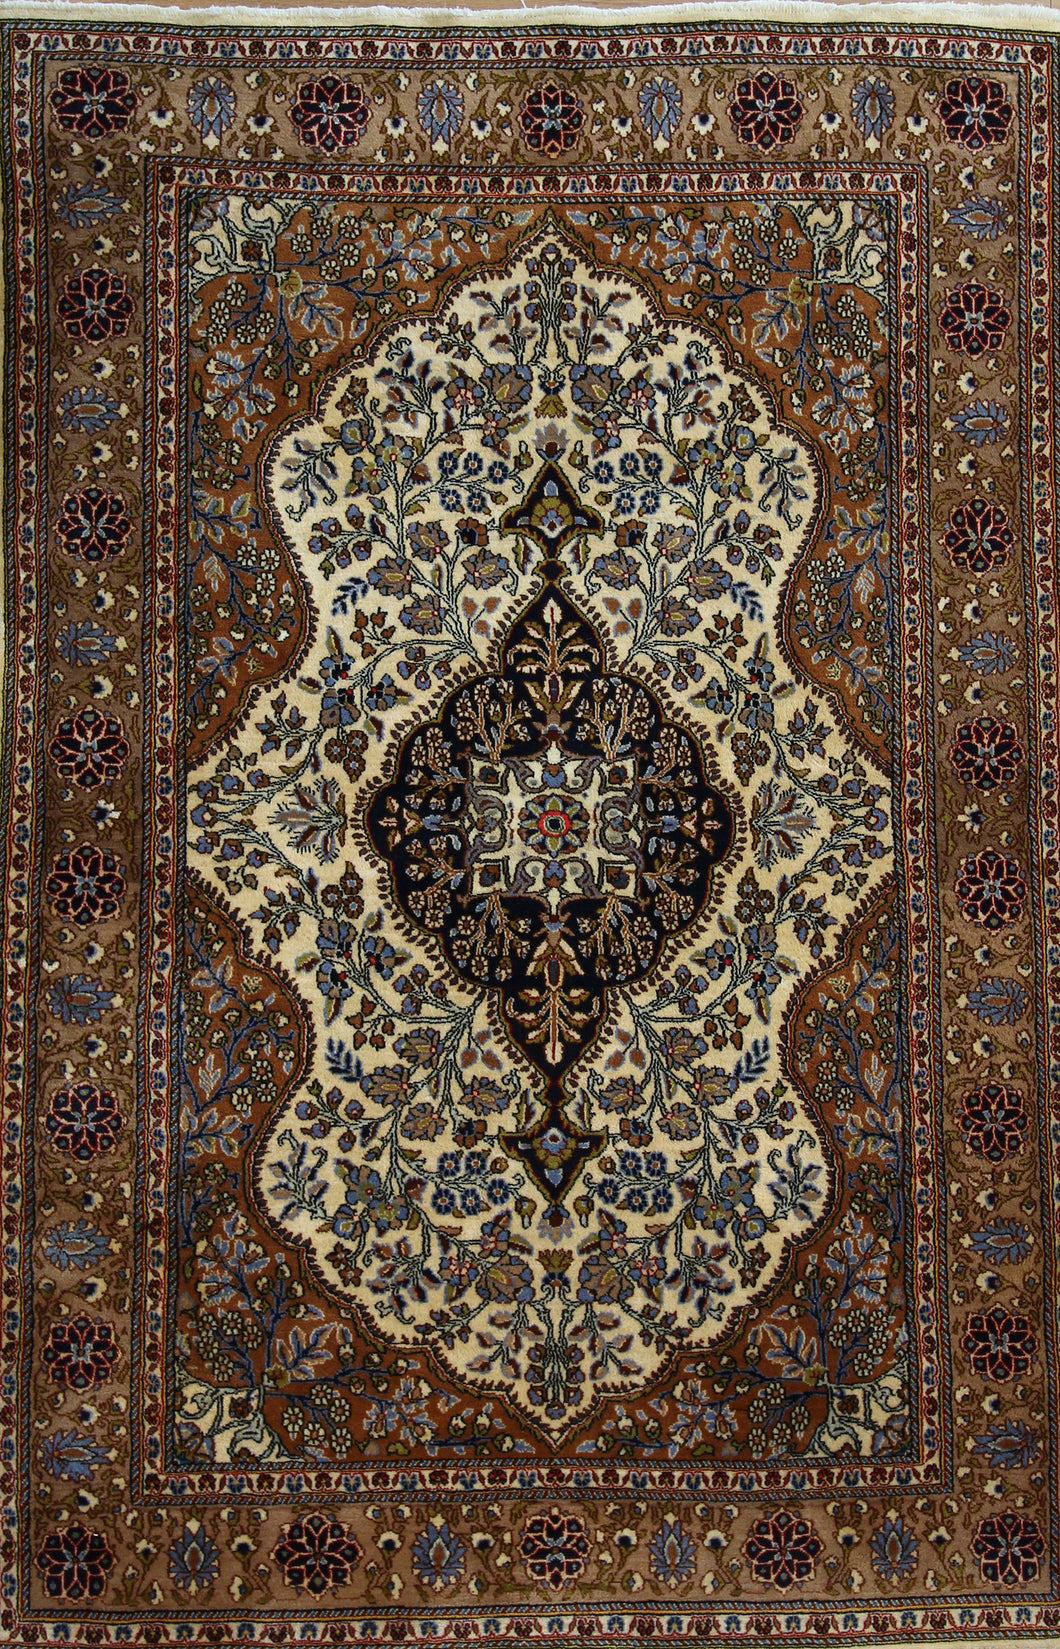 Persian Rugs , Antique Rugs , Wool Rugs , Area Rugs , Hand-knotted Rugs